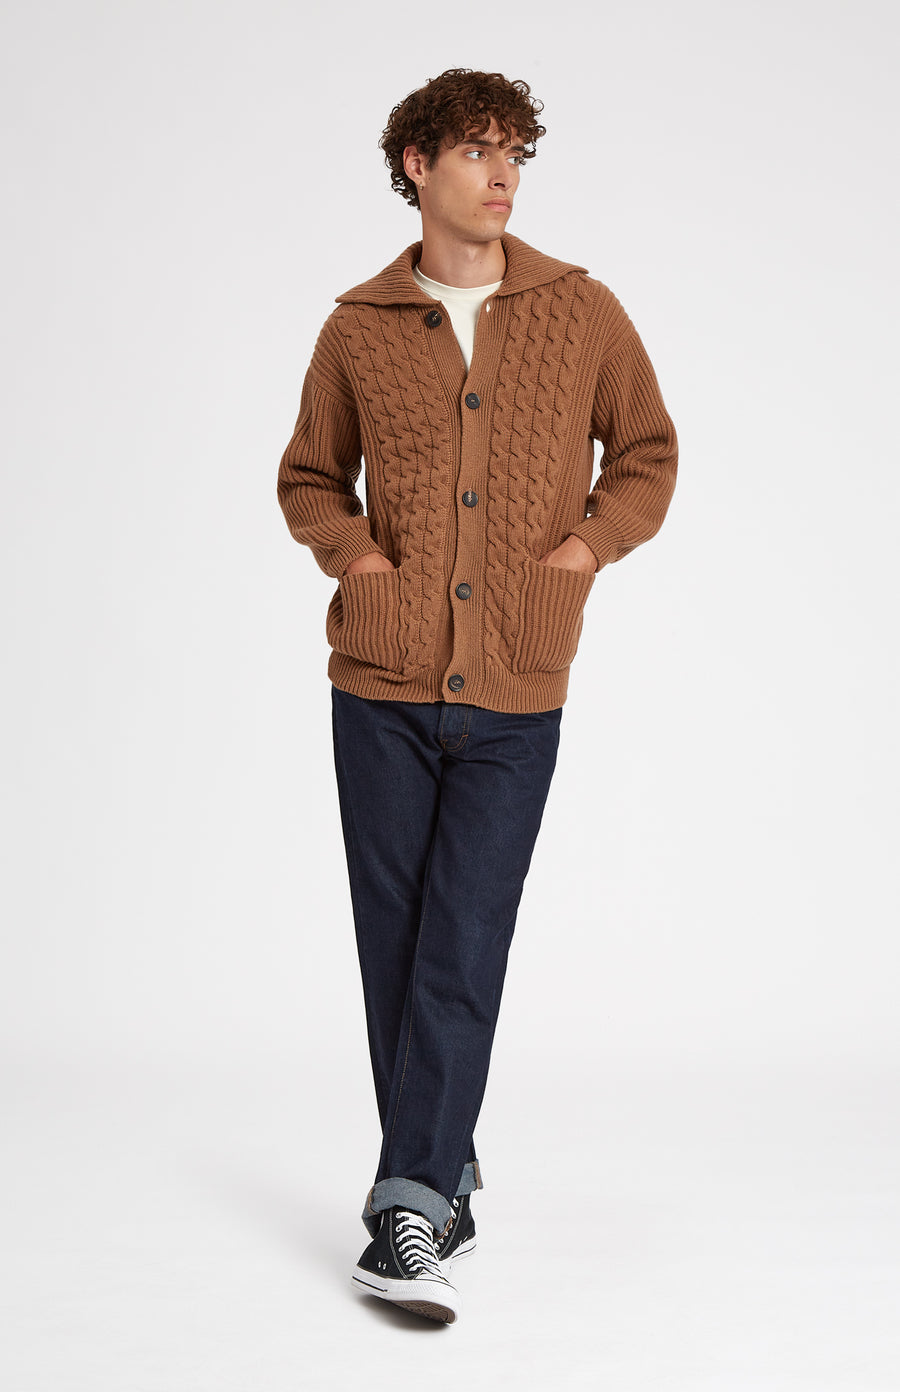 Superfine Wool Collar Cardigan with allover rib in Vicuna on model - Pringle of Scotland